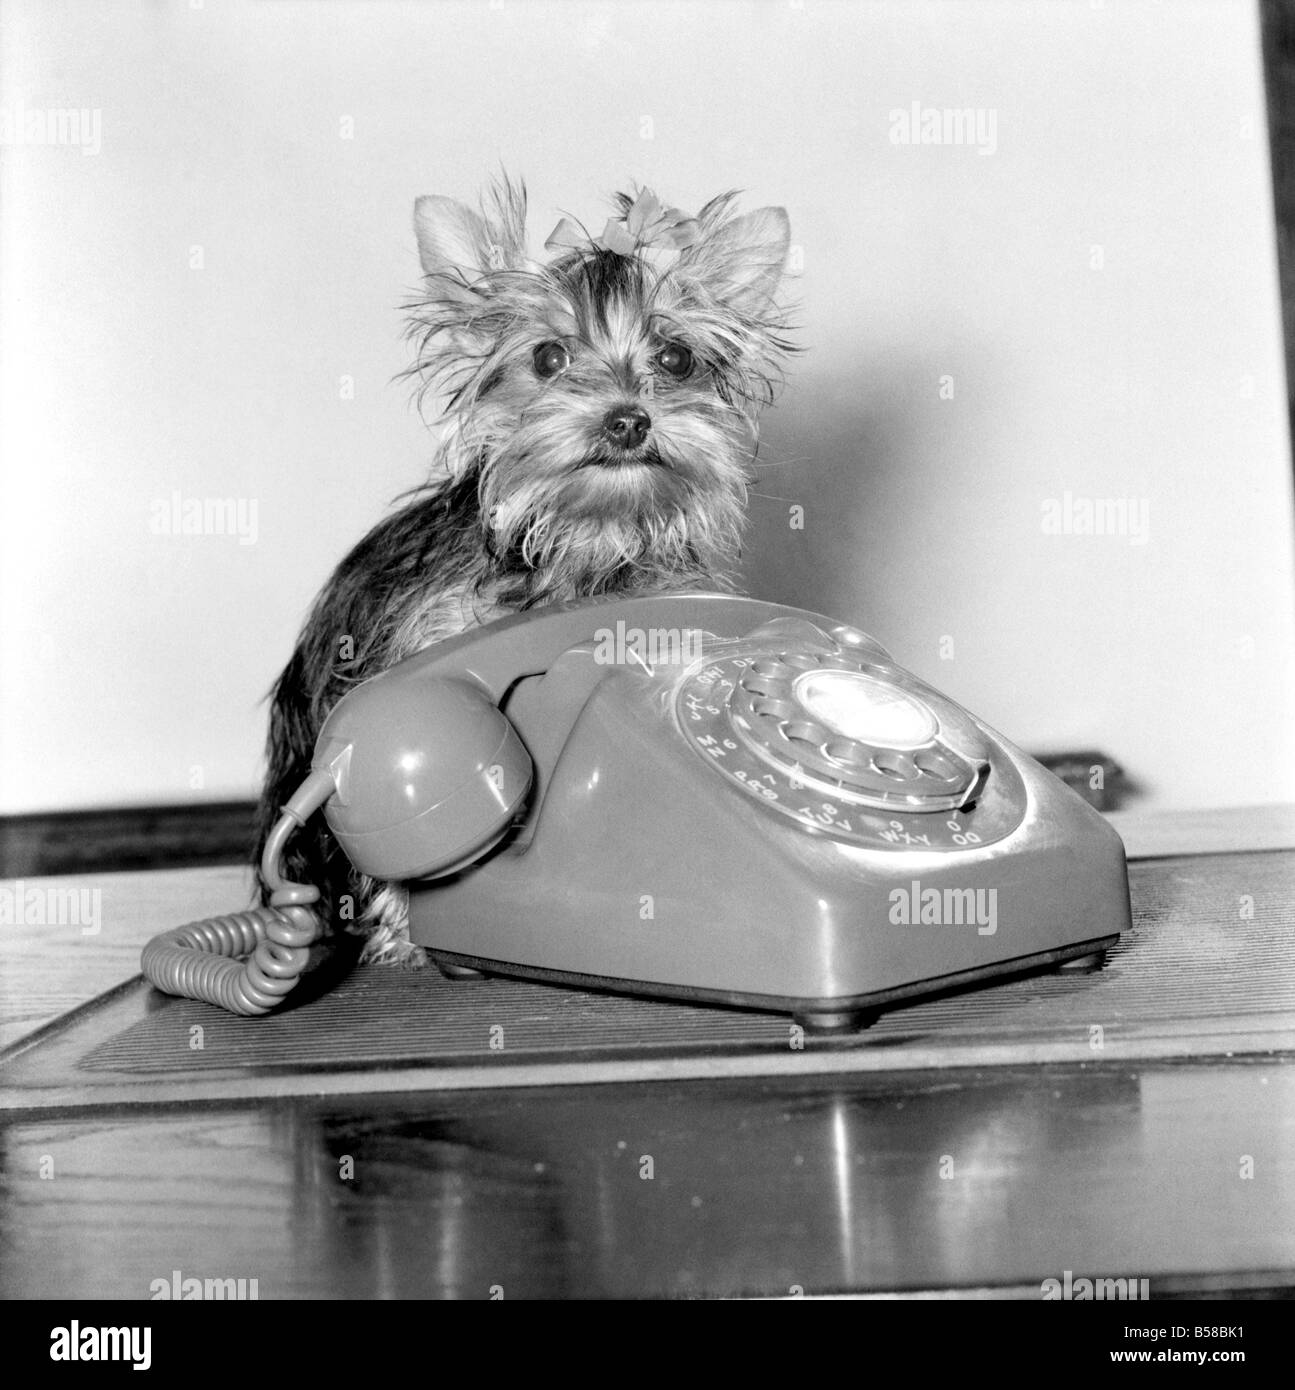 Fifi here is smaller than the average Yorkshire Terrier. Weighing in at only 24 oz. Fifi is seen here next to the dog and bone which is Cockney rhyming slang for telephone. April 1977 77-02090 Stock Photo